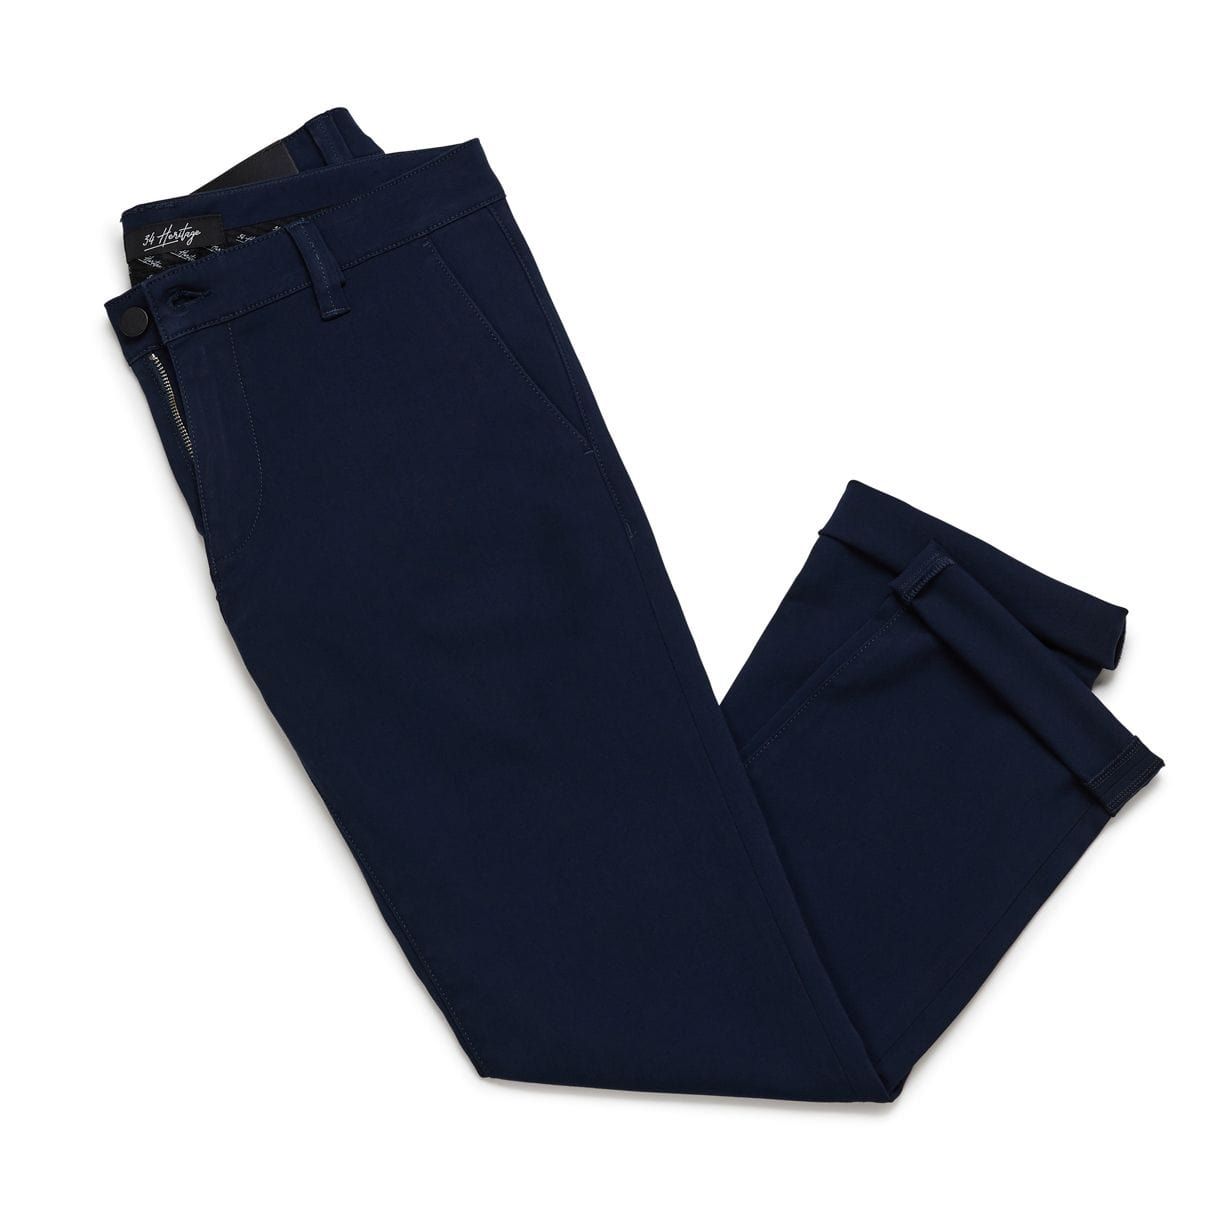 34 Heritage NAVY / 31 / 32 34 Heritage Cool Navy in High Flyer Pant